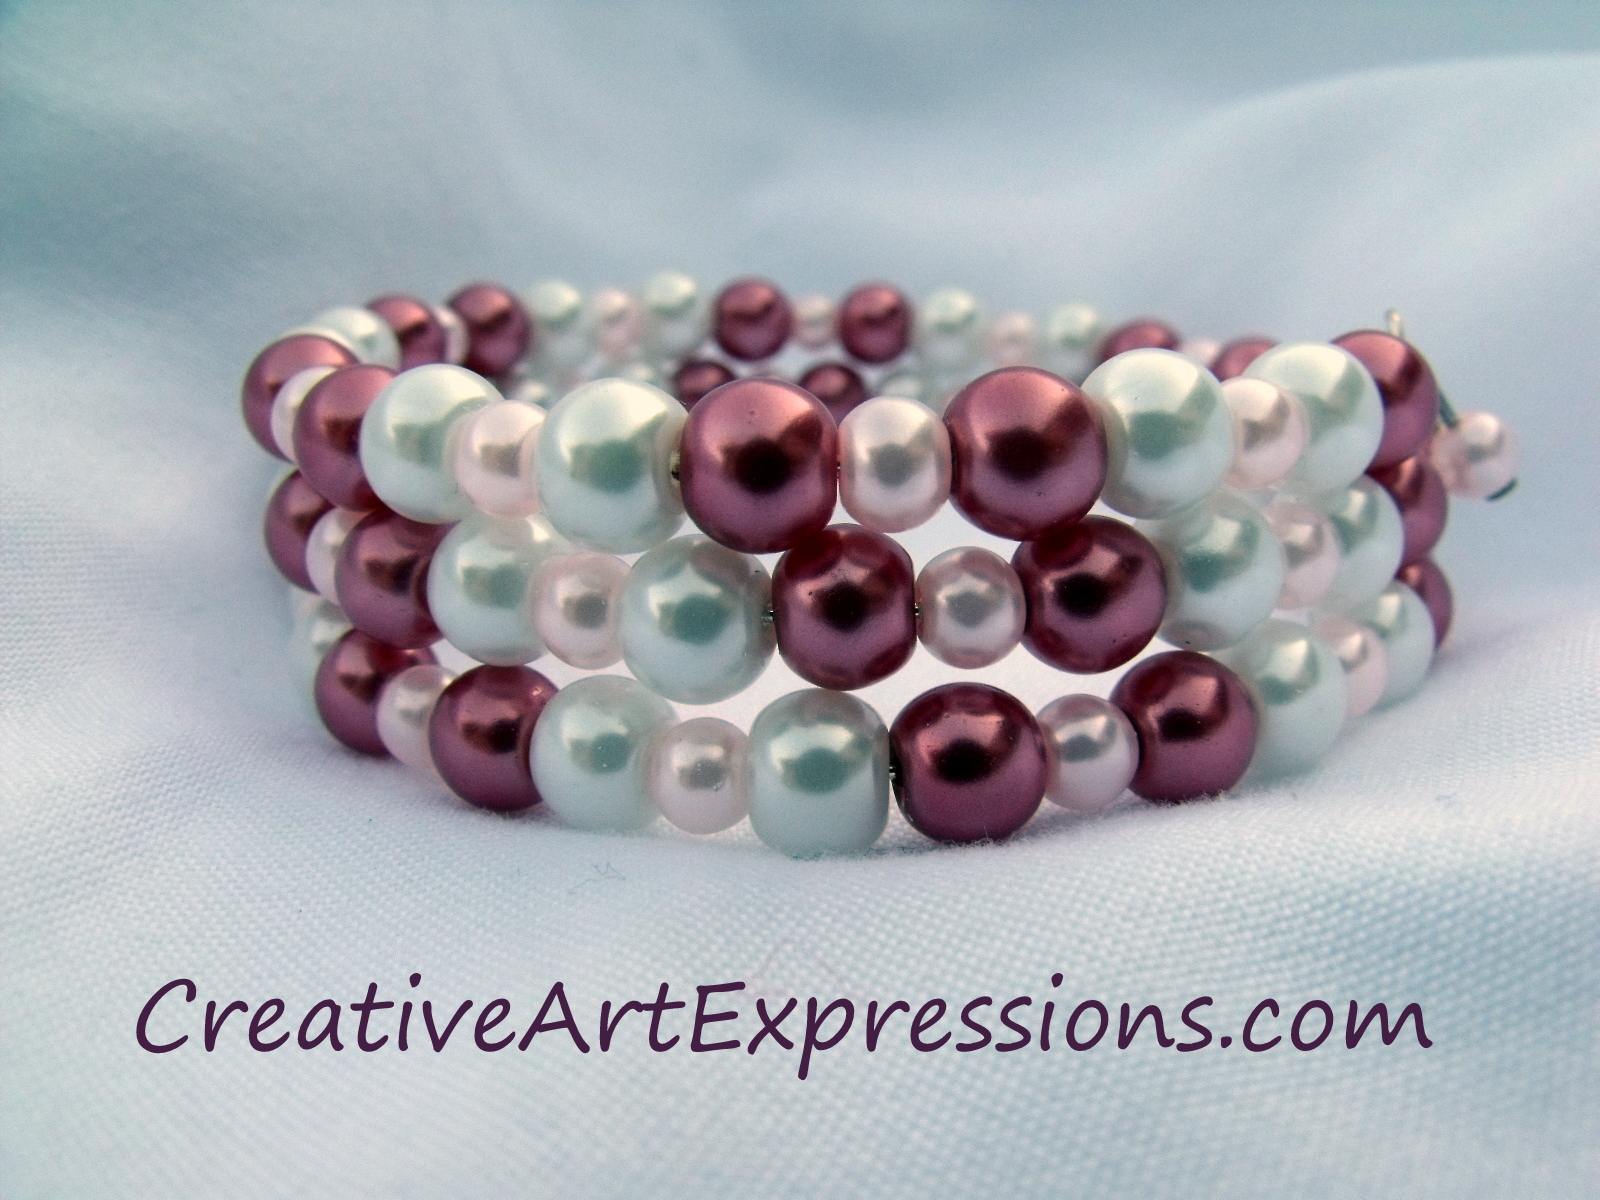 Creative Art Expressions Handmade Cranberry Pink & White Glass Pearl Memory Wire Bracelet Jewelry Design